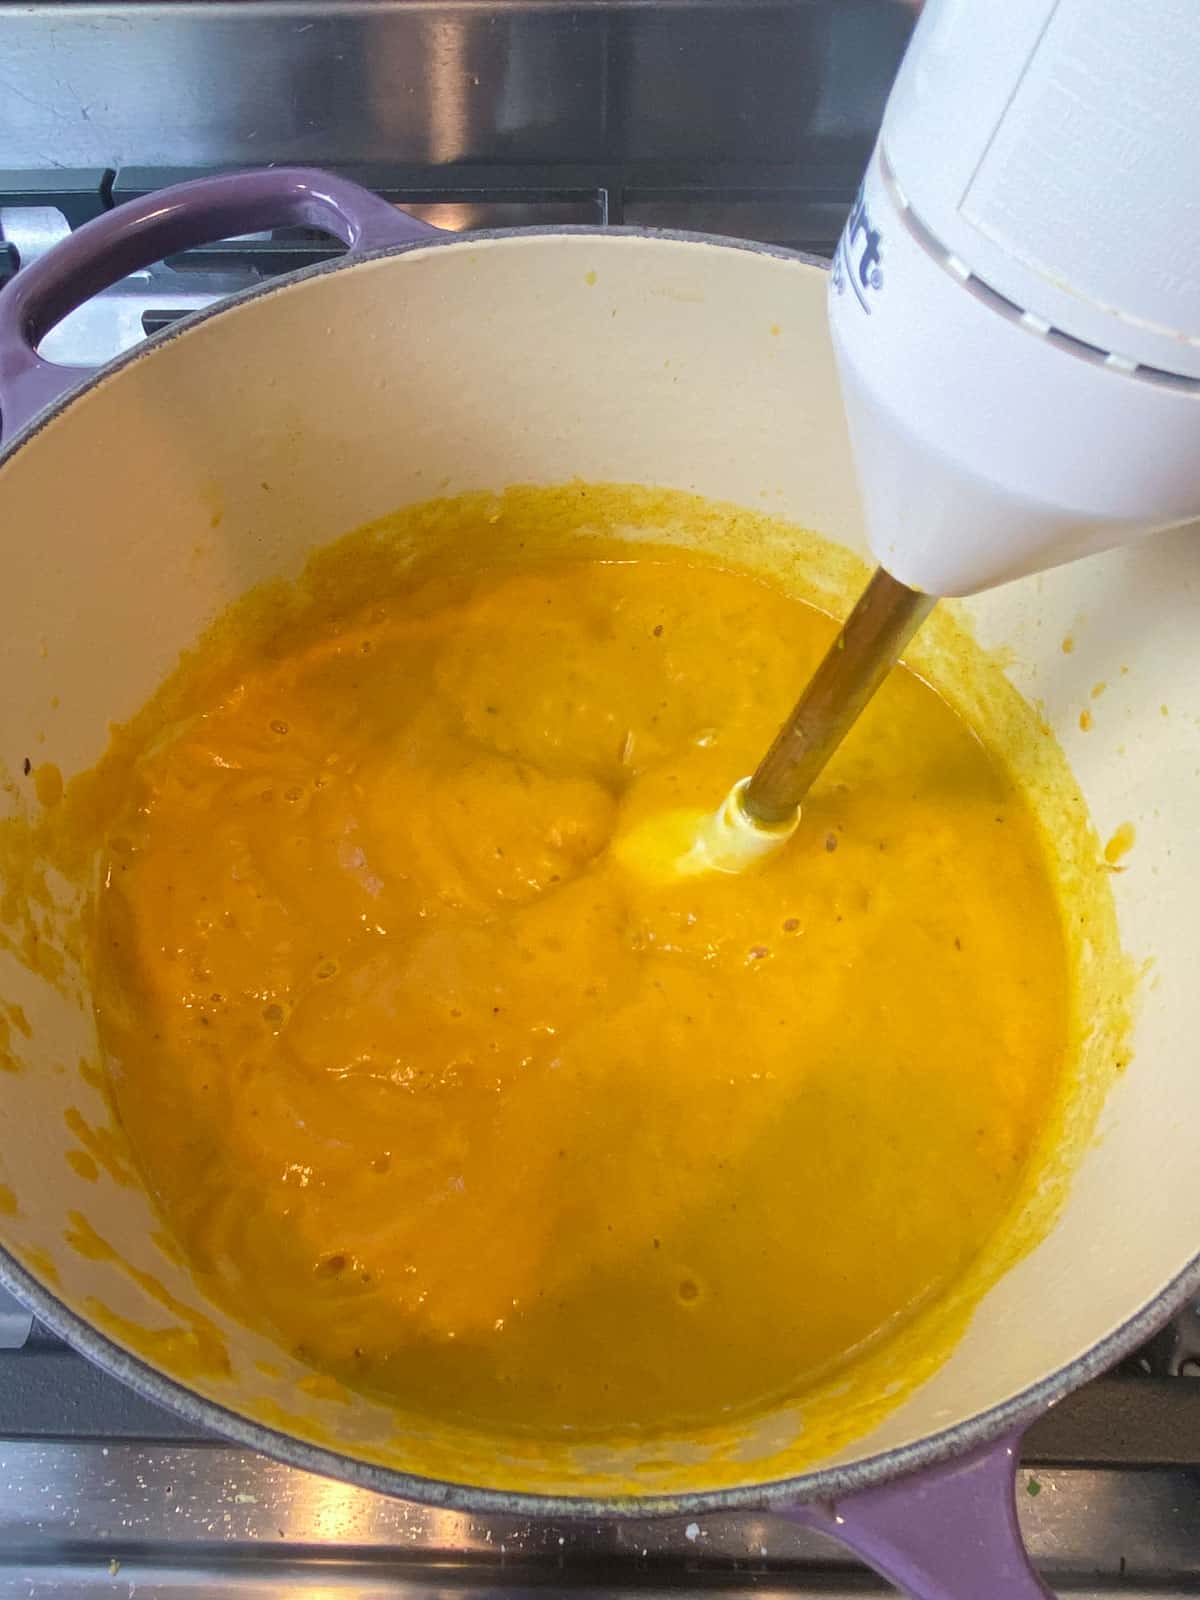 Blend the squash soup with an immersion blender until completely smooth.